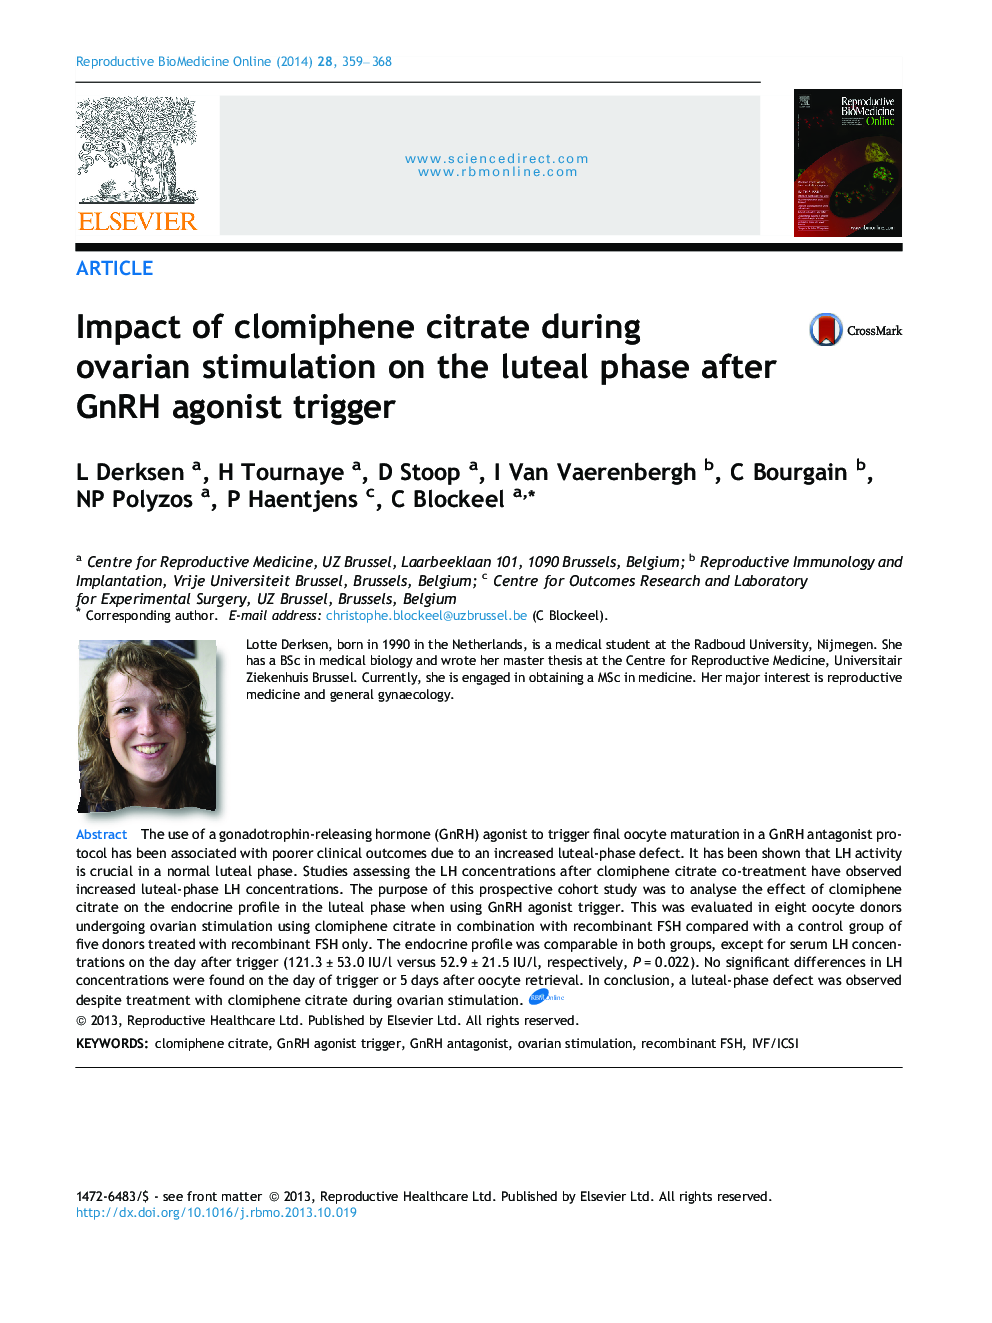 Impact of clomiphene citrate during ovarian stimulation on the luteal phase after GnRH agonist trigger